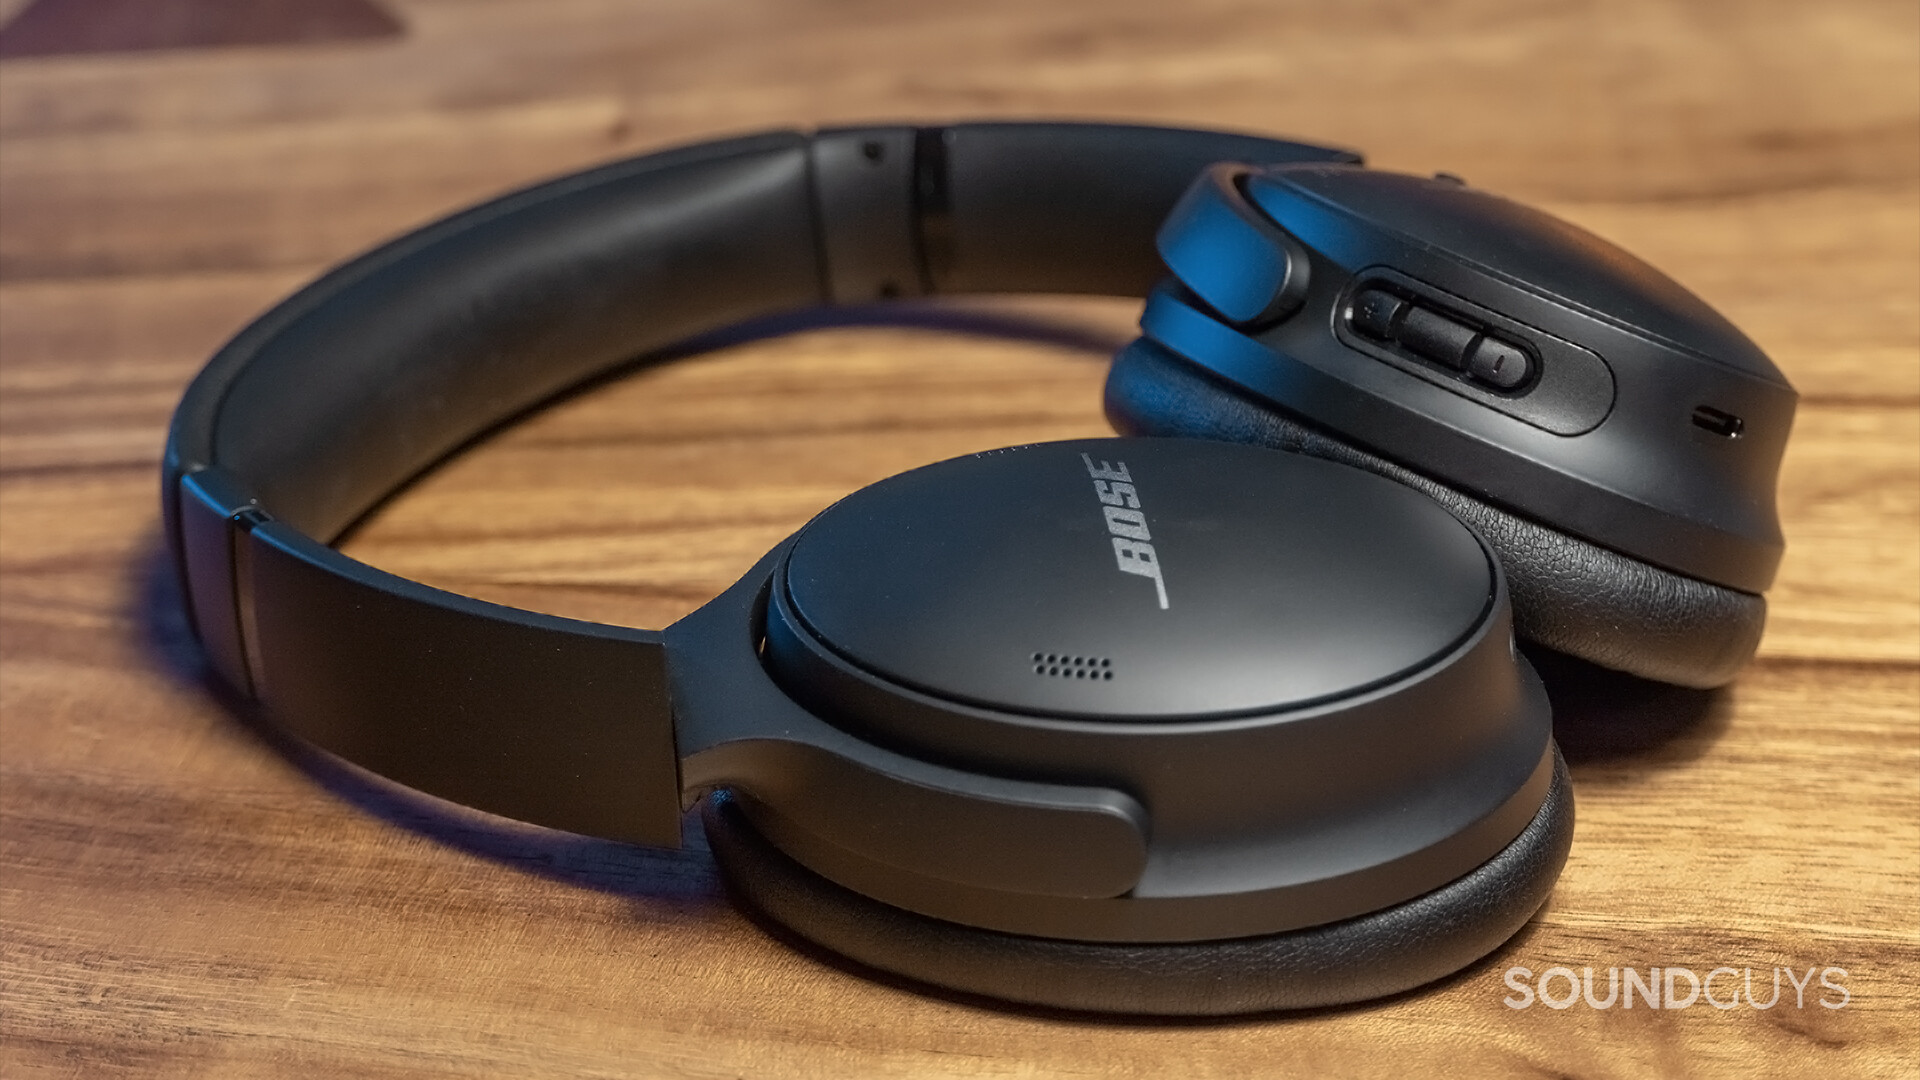 Bose QuietComfort 45 Wireless Noise Cancelling Over-the-Ear